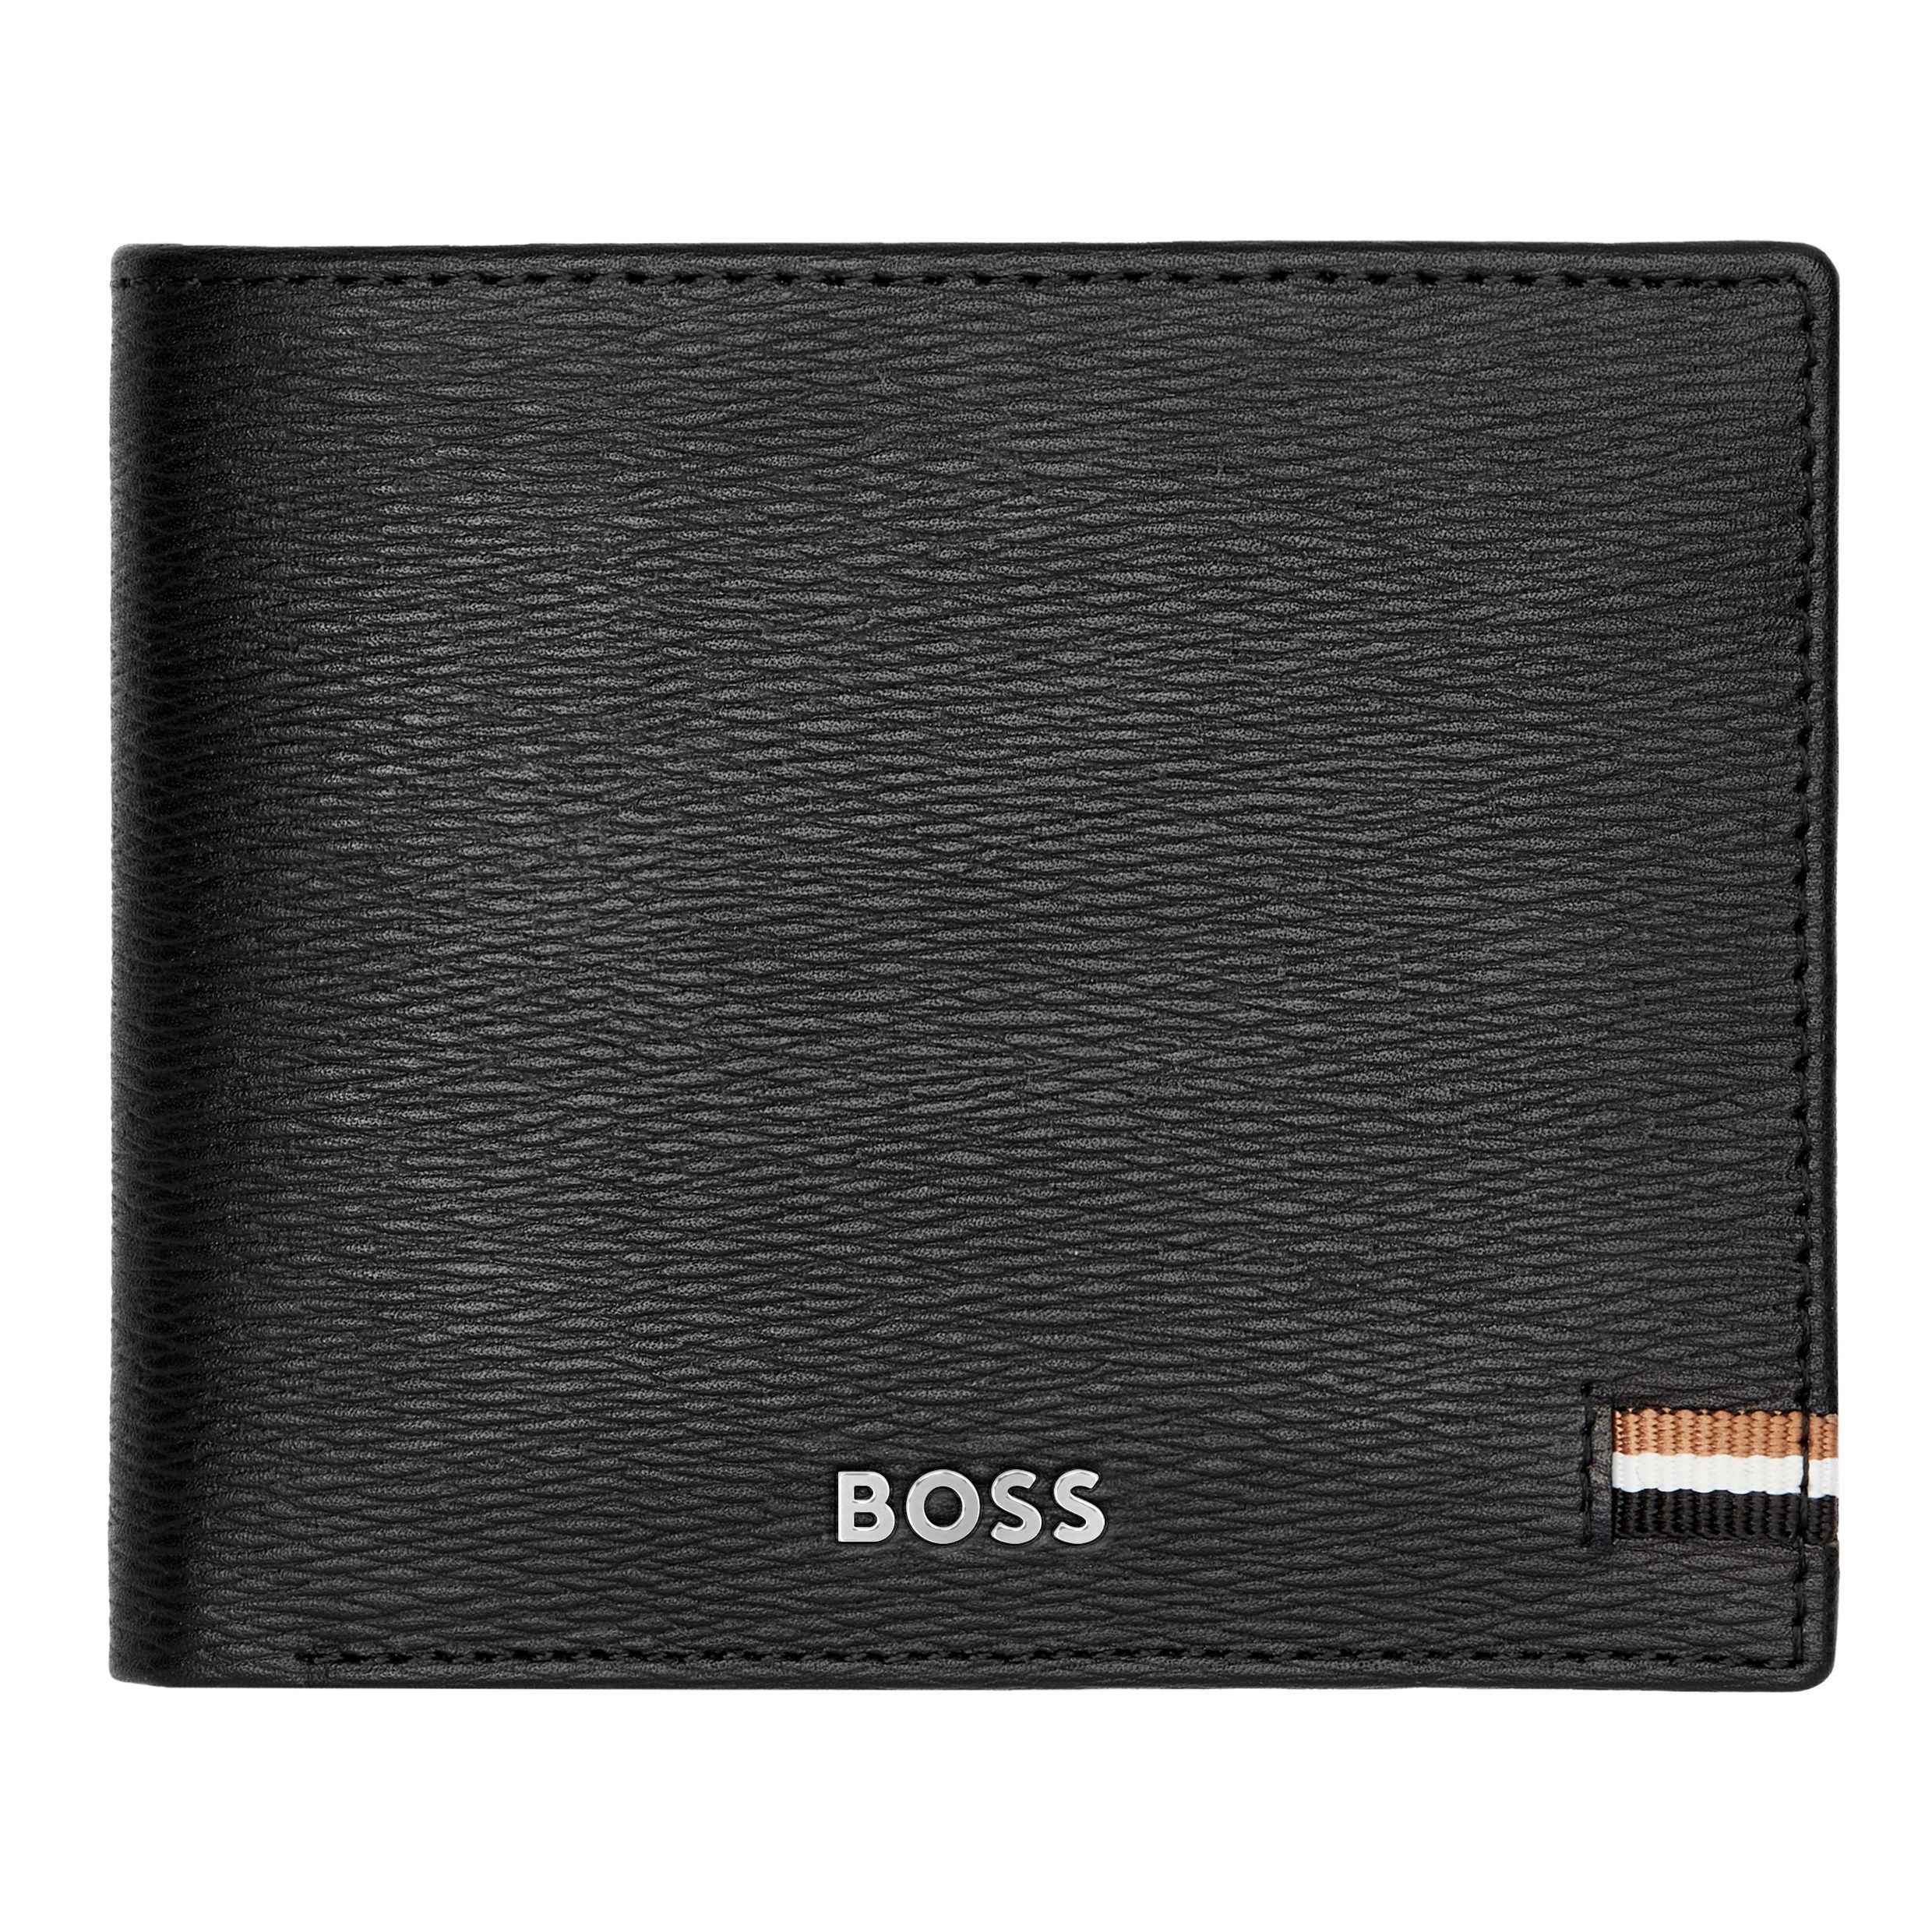 Iconic - Textured Leather, Luxury Bifold Wallet